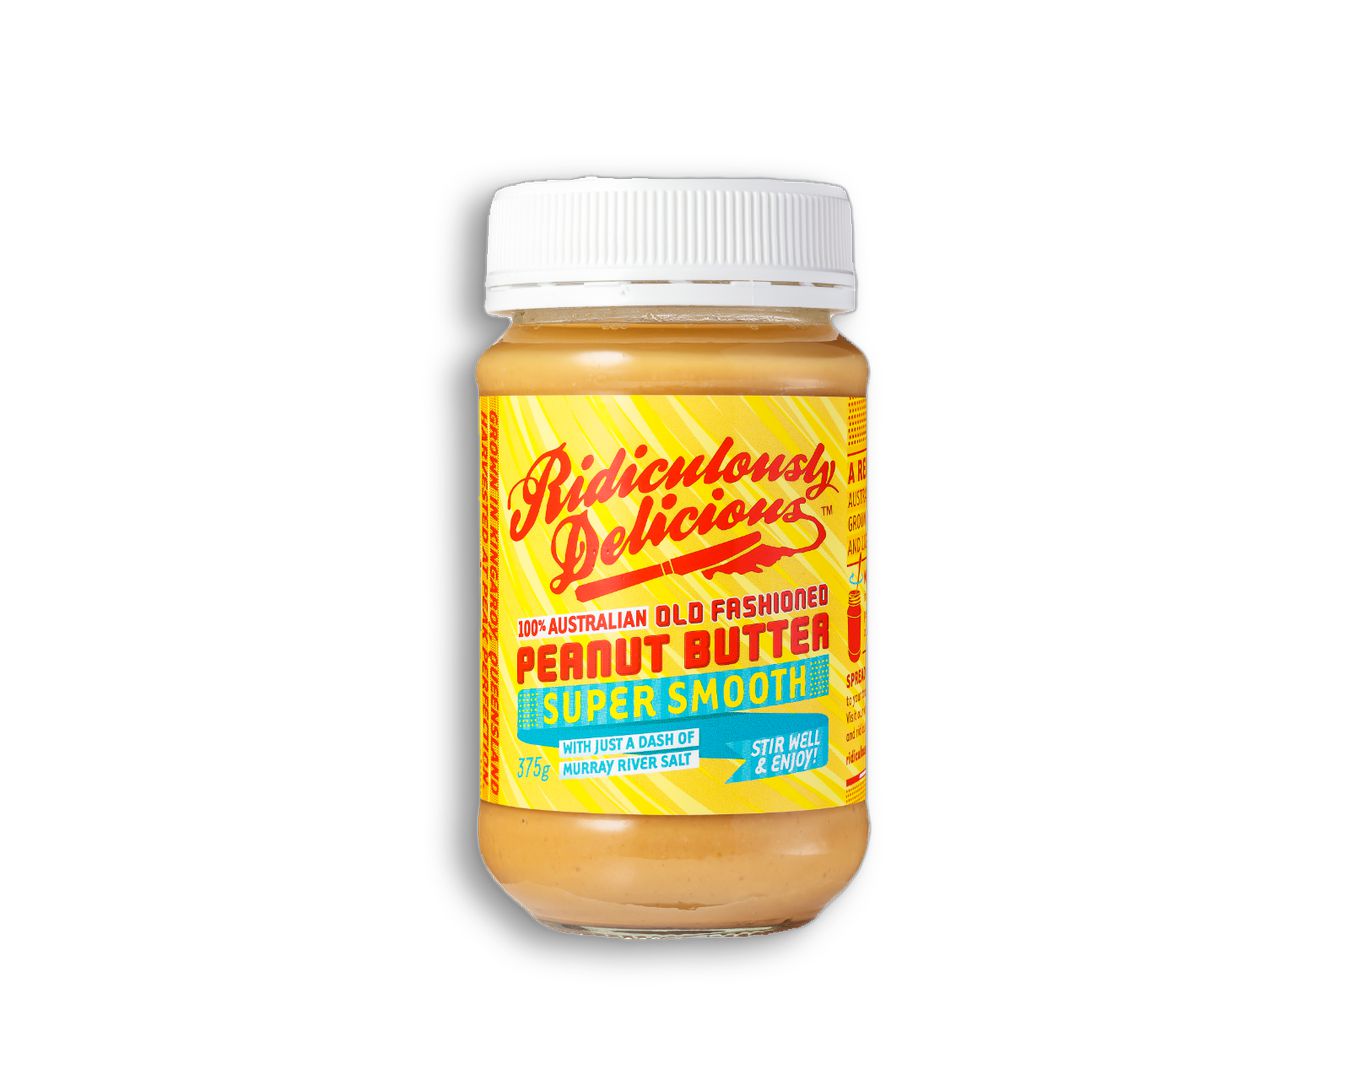 Ridiculously Delicious Peanut Butter Smooth 375gr-Peanut Butter-The Local Basket